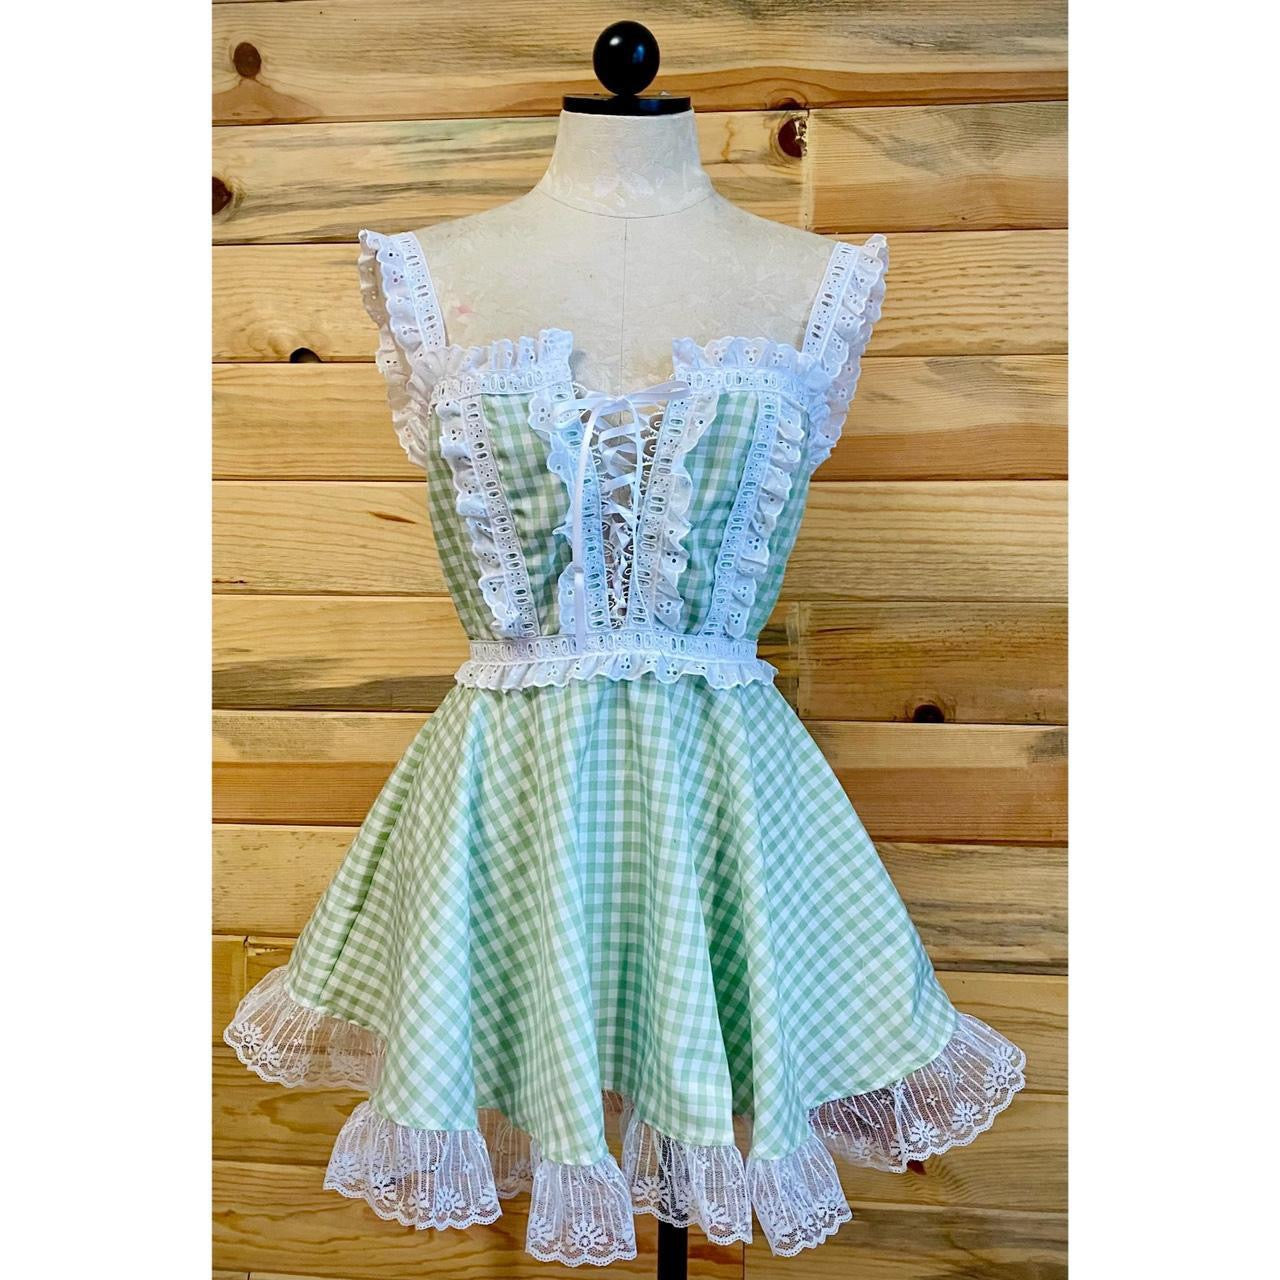 The Danni Dress in Mint Gingham